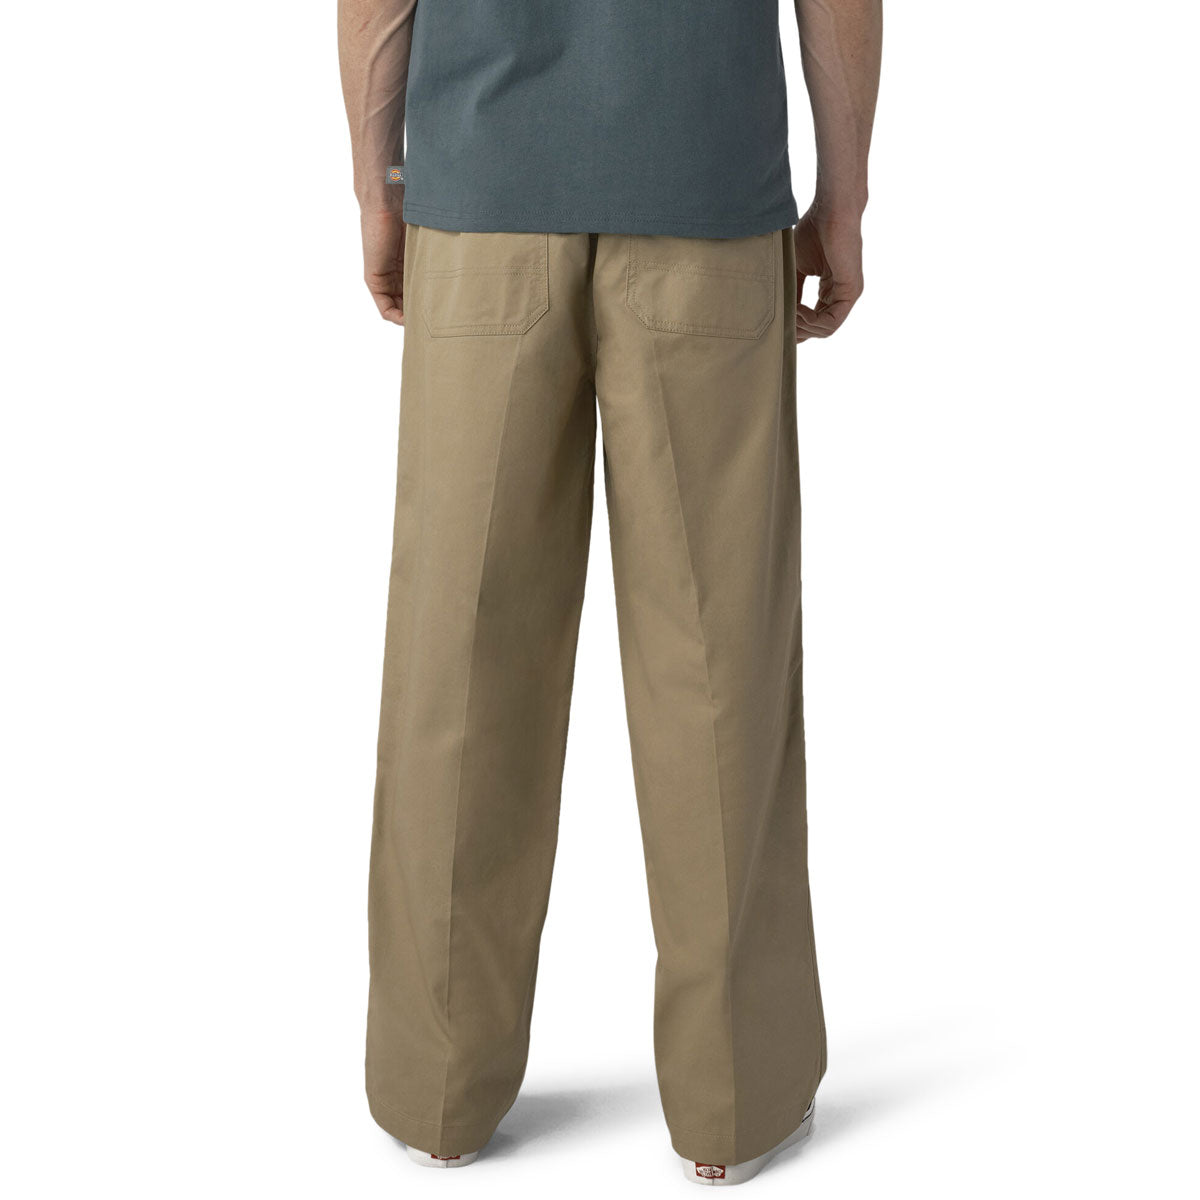 Dickies Summit Relaxed Fit Chef Pants - Desert Sand image 2